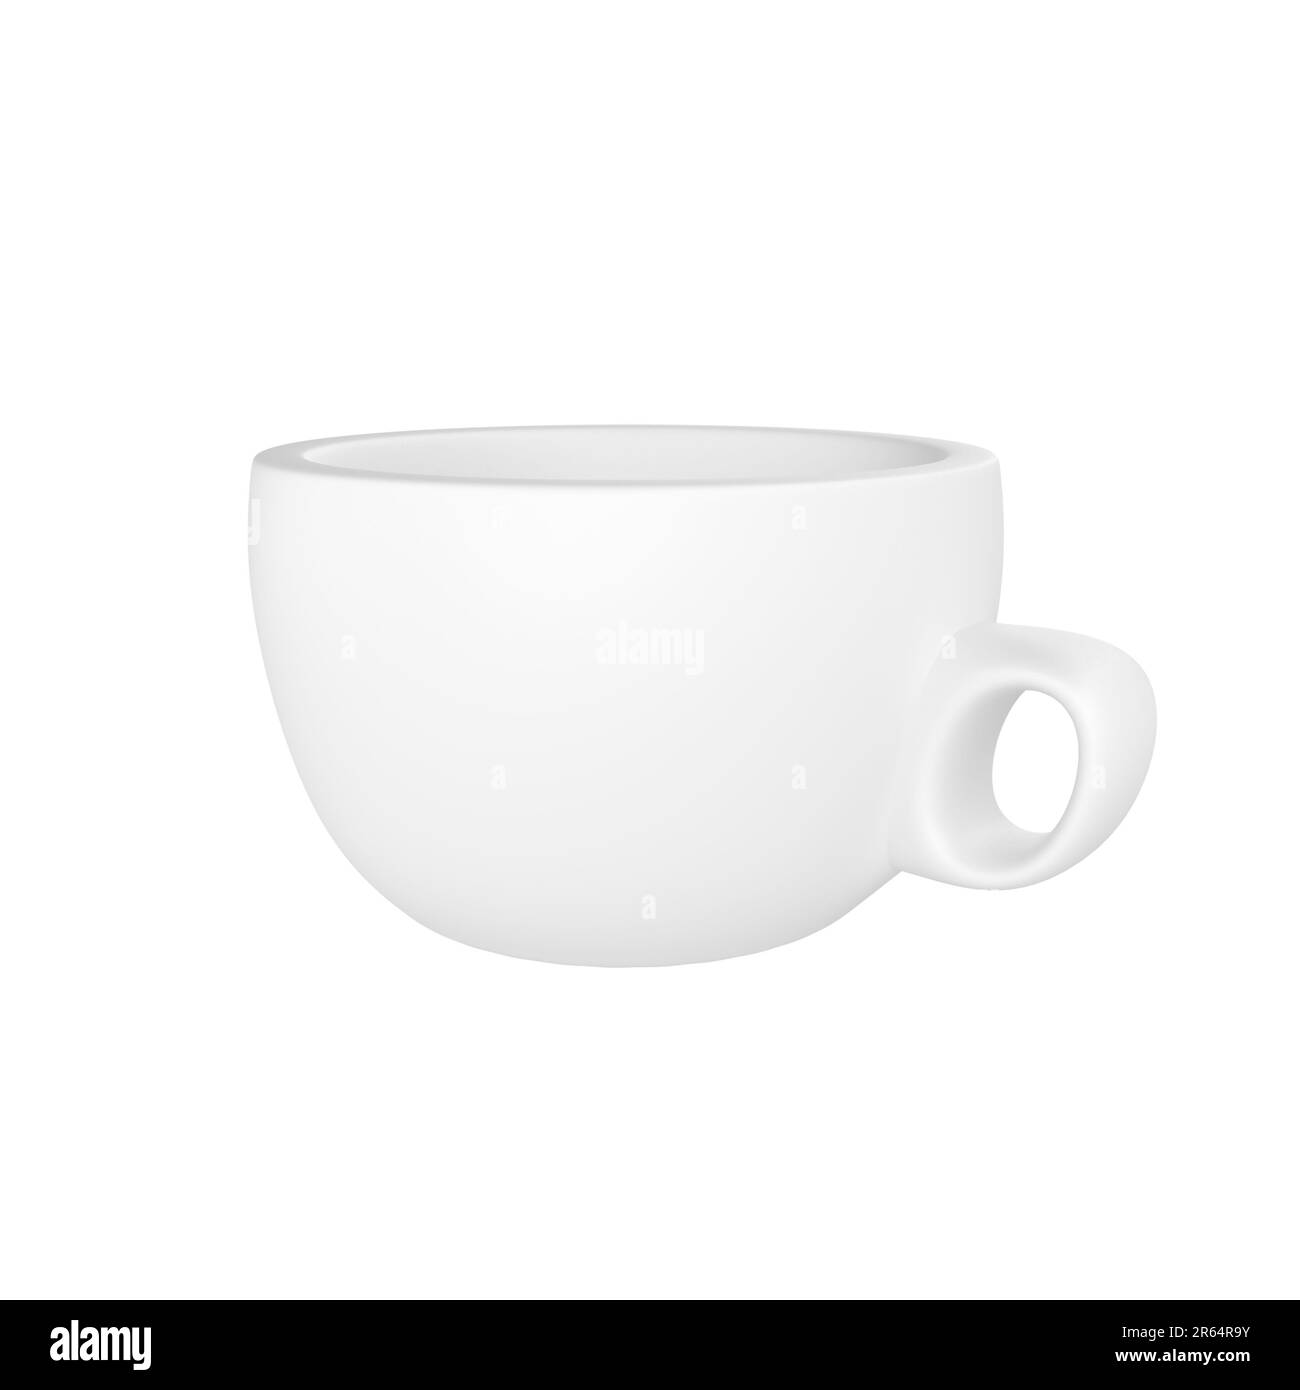 https://c8.alamy.com/comp/2R64R9Y/3d-photo-realistic-white-cup-icon-mockup-rendering-design-template-for-mock-up-ceramic-clean-white-mug-with-a-matte-effect-isolated-transparent-png-2R64R9Y.jpg